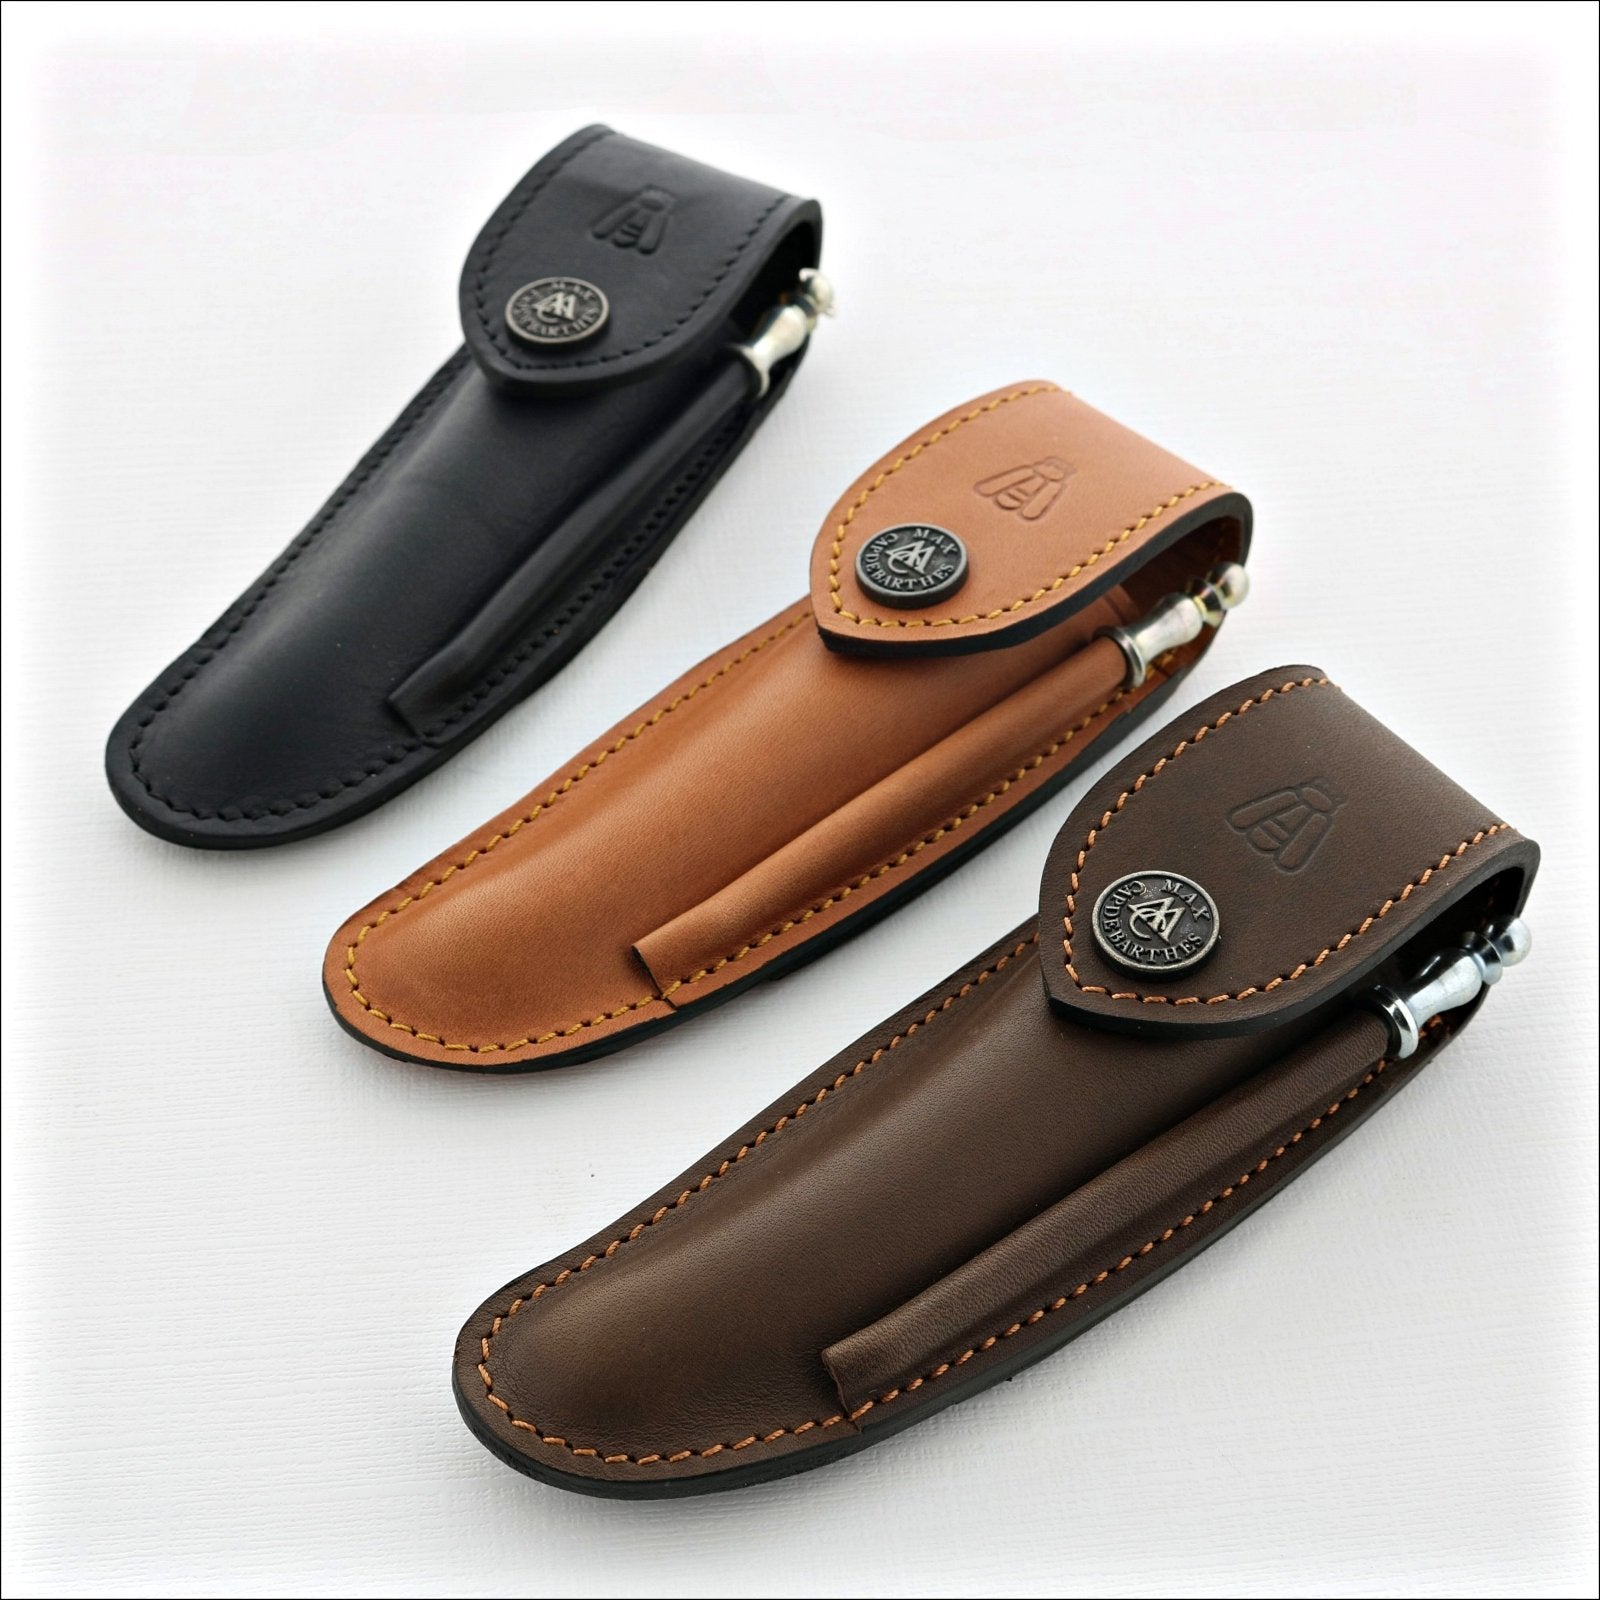 Club Leather Knife Sheath for 9 to 12 cm Pocket Knives